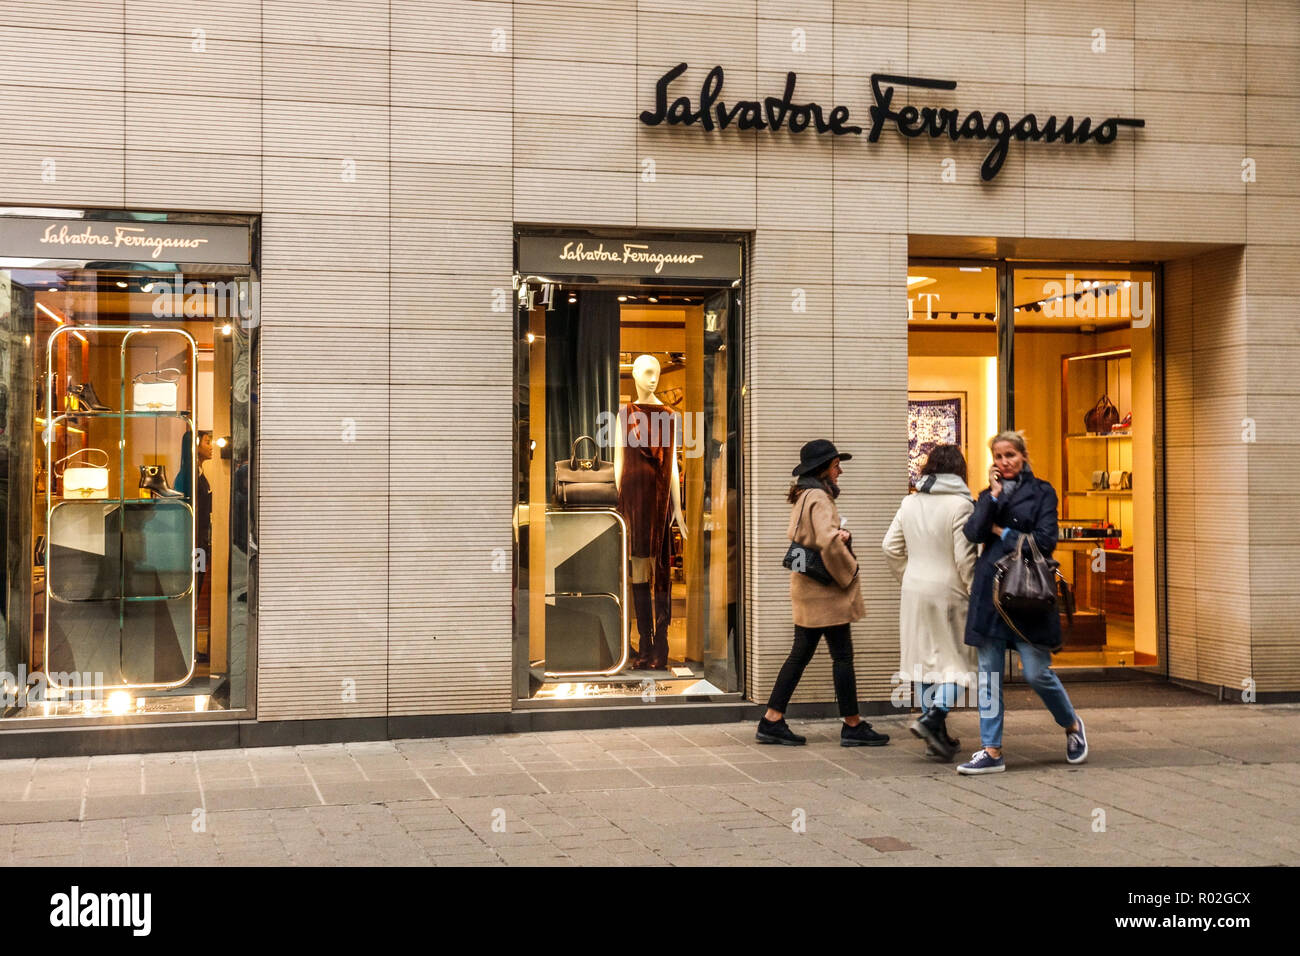 Salvatore Ferragamo Store High Resolution Stock Photography and Images -  Alamy